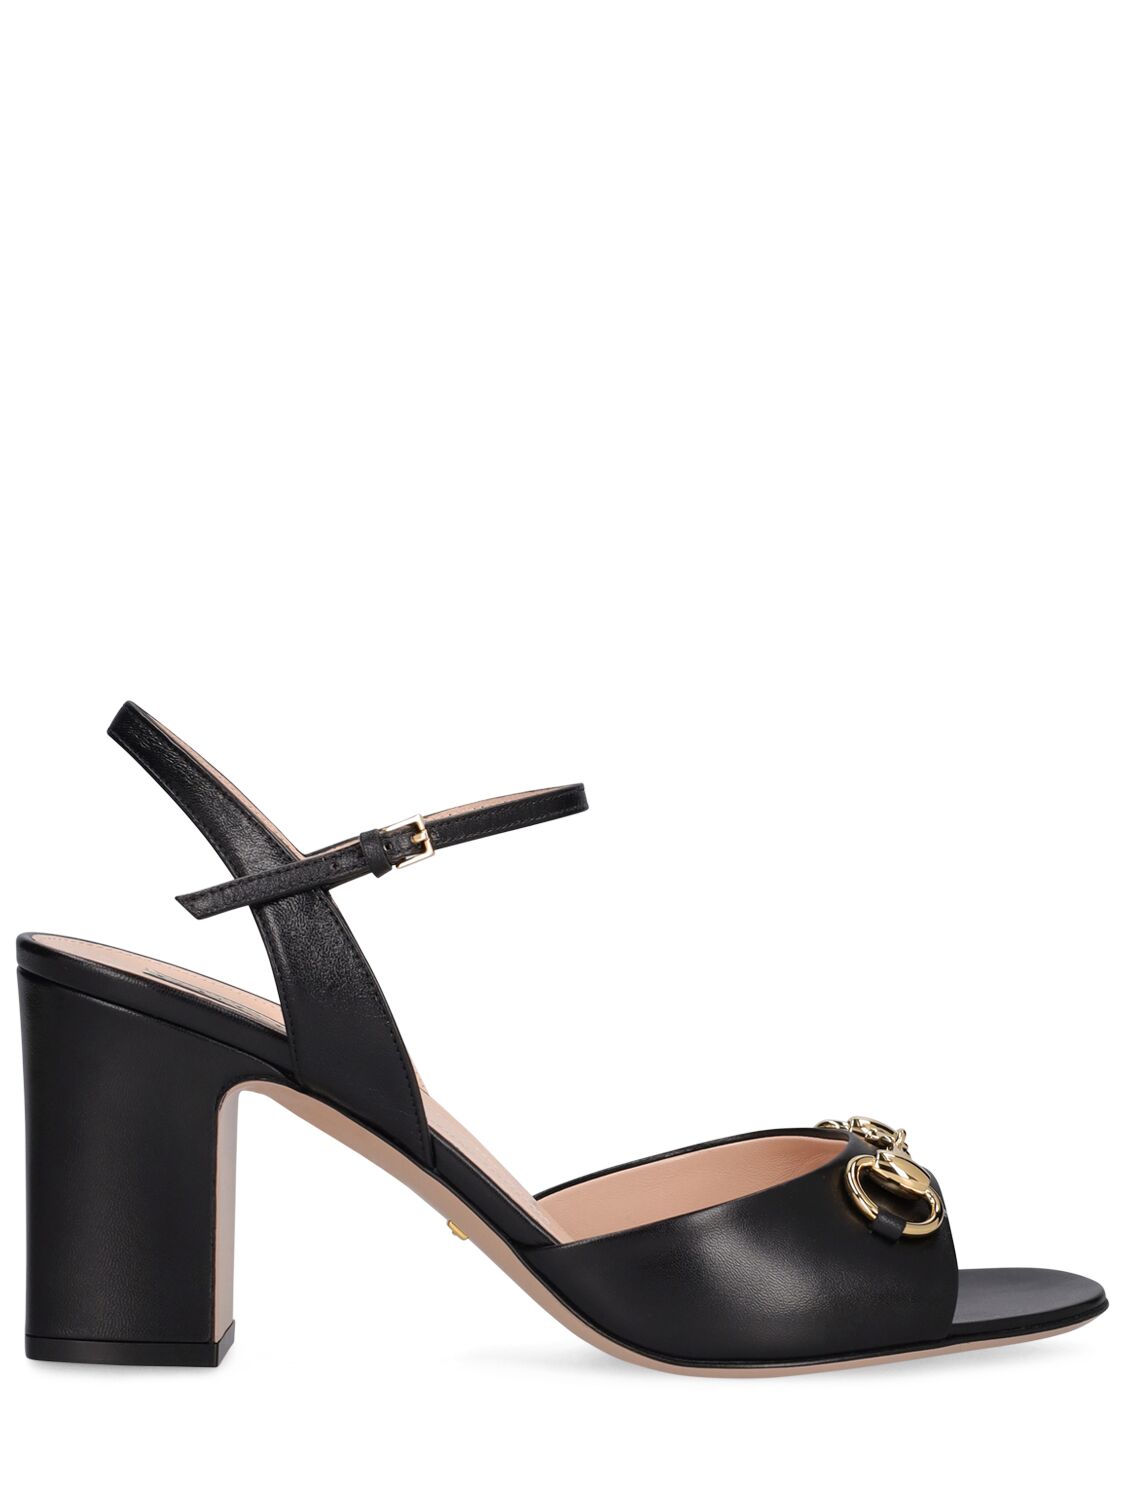 Gucci 75mm Lady Horsebit Leather Sandals In Black